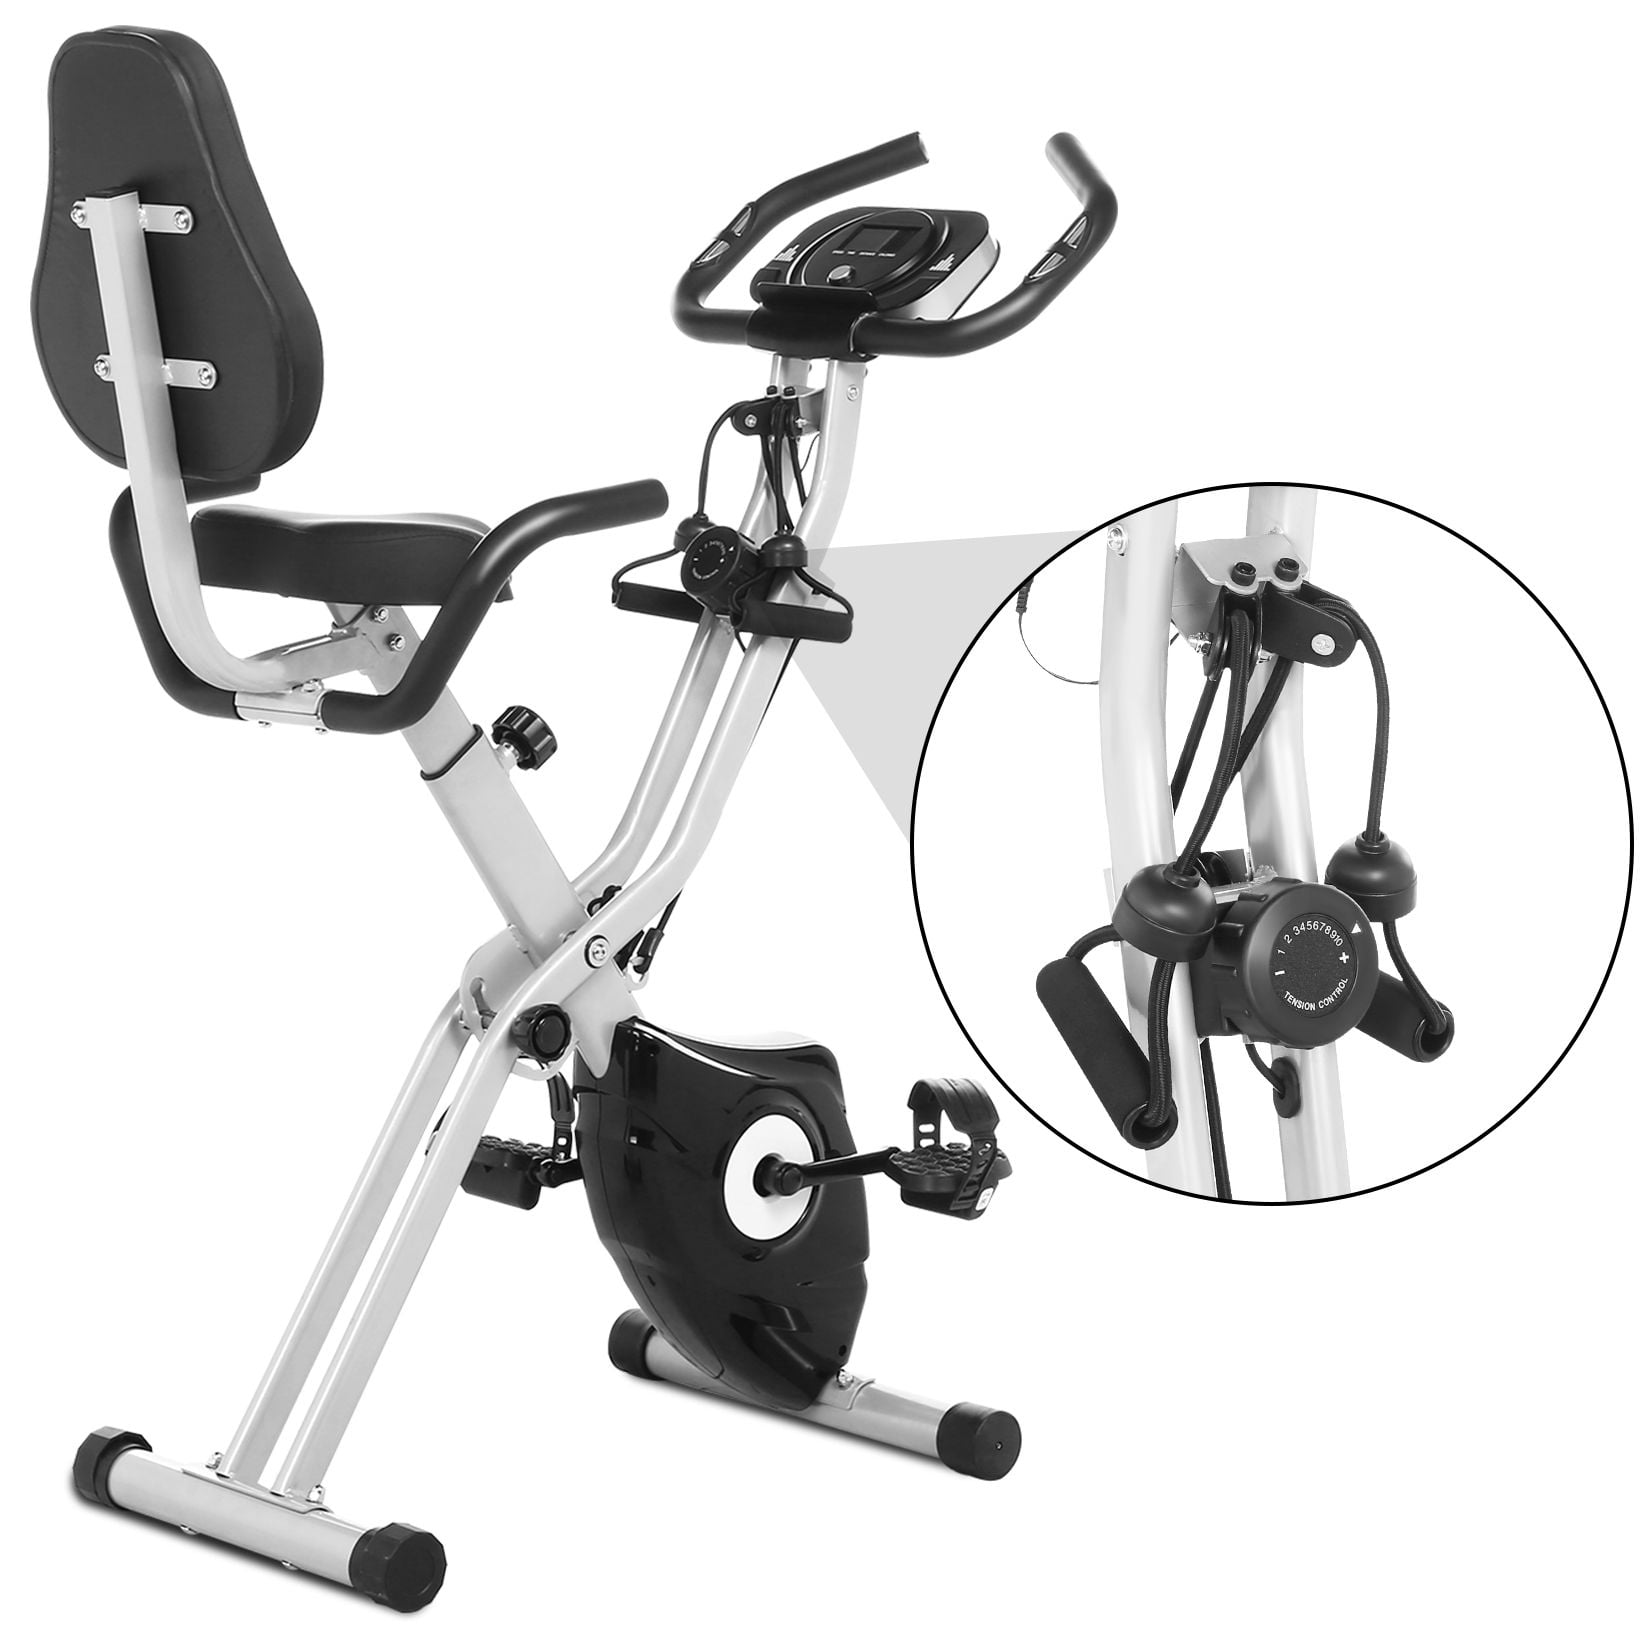 Pro Stationary Exercise Fitness Bike Indoor Cardio Cycle Bicycle Water Bottle 